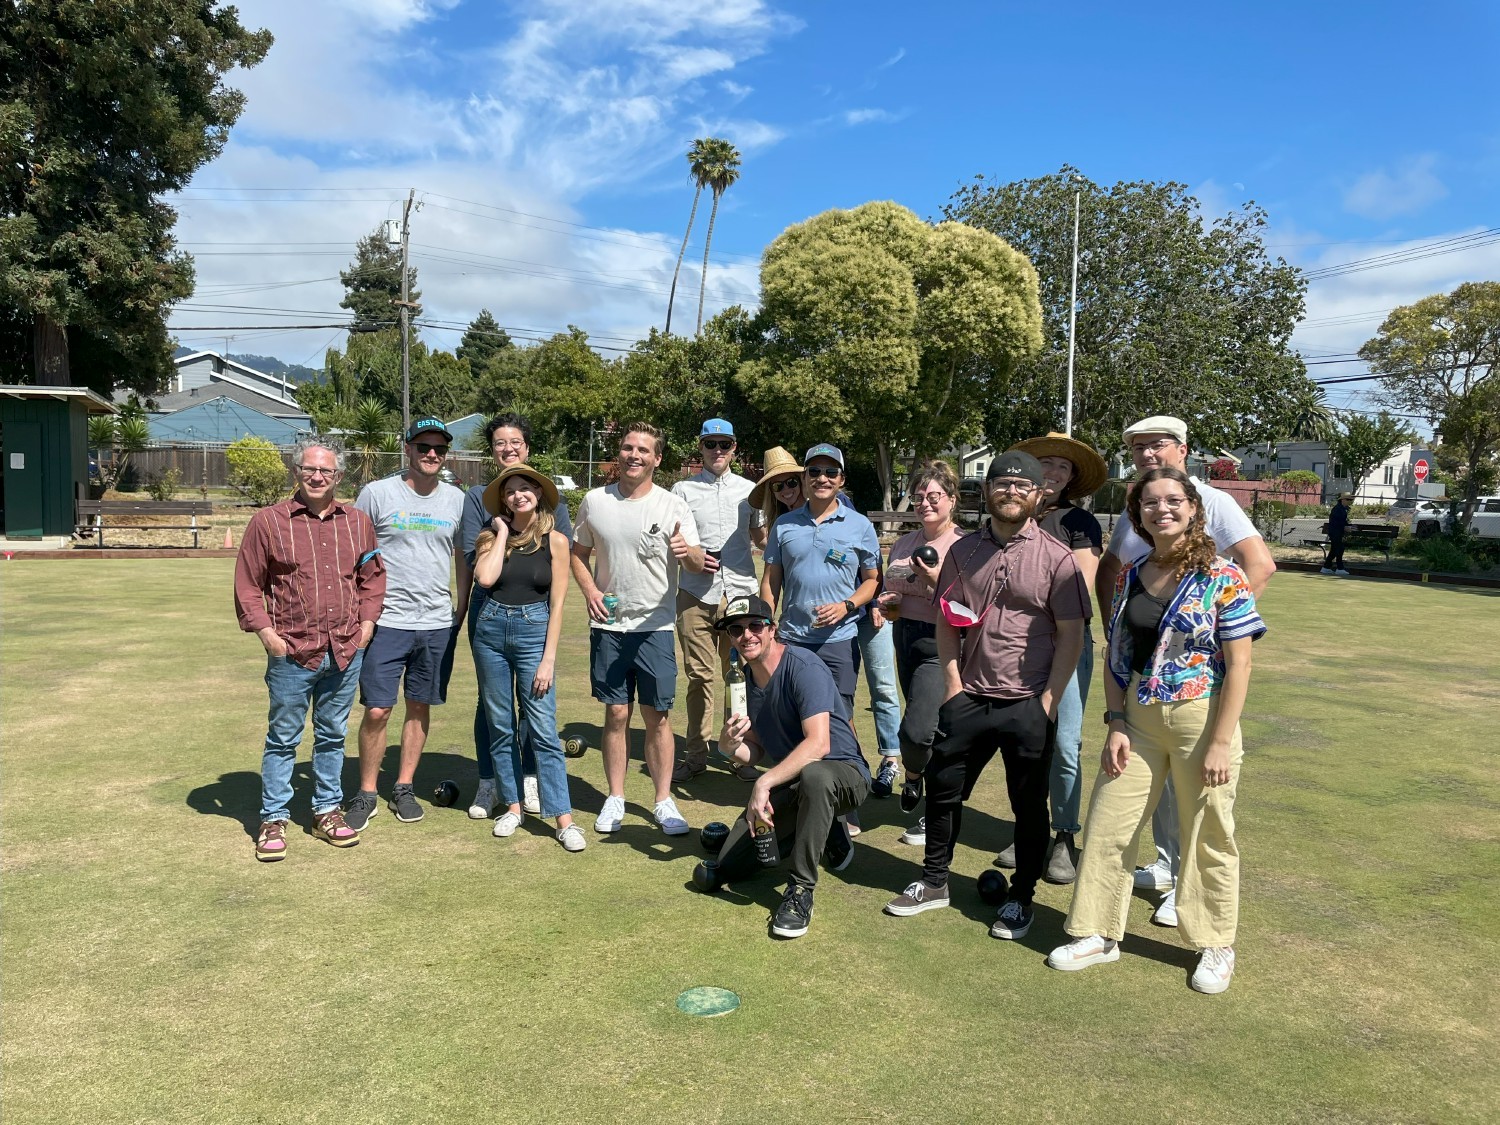 Ava staff lawn bowling event, winning team pictured